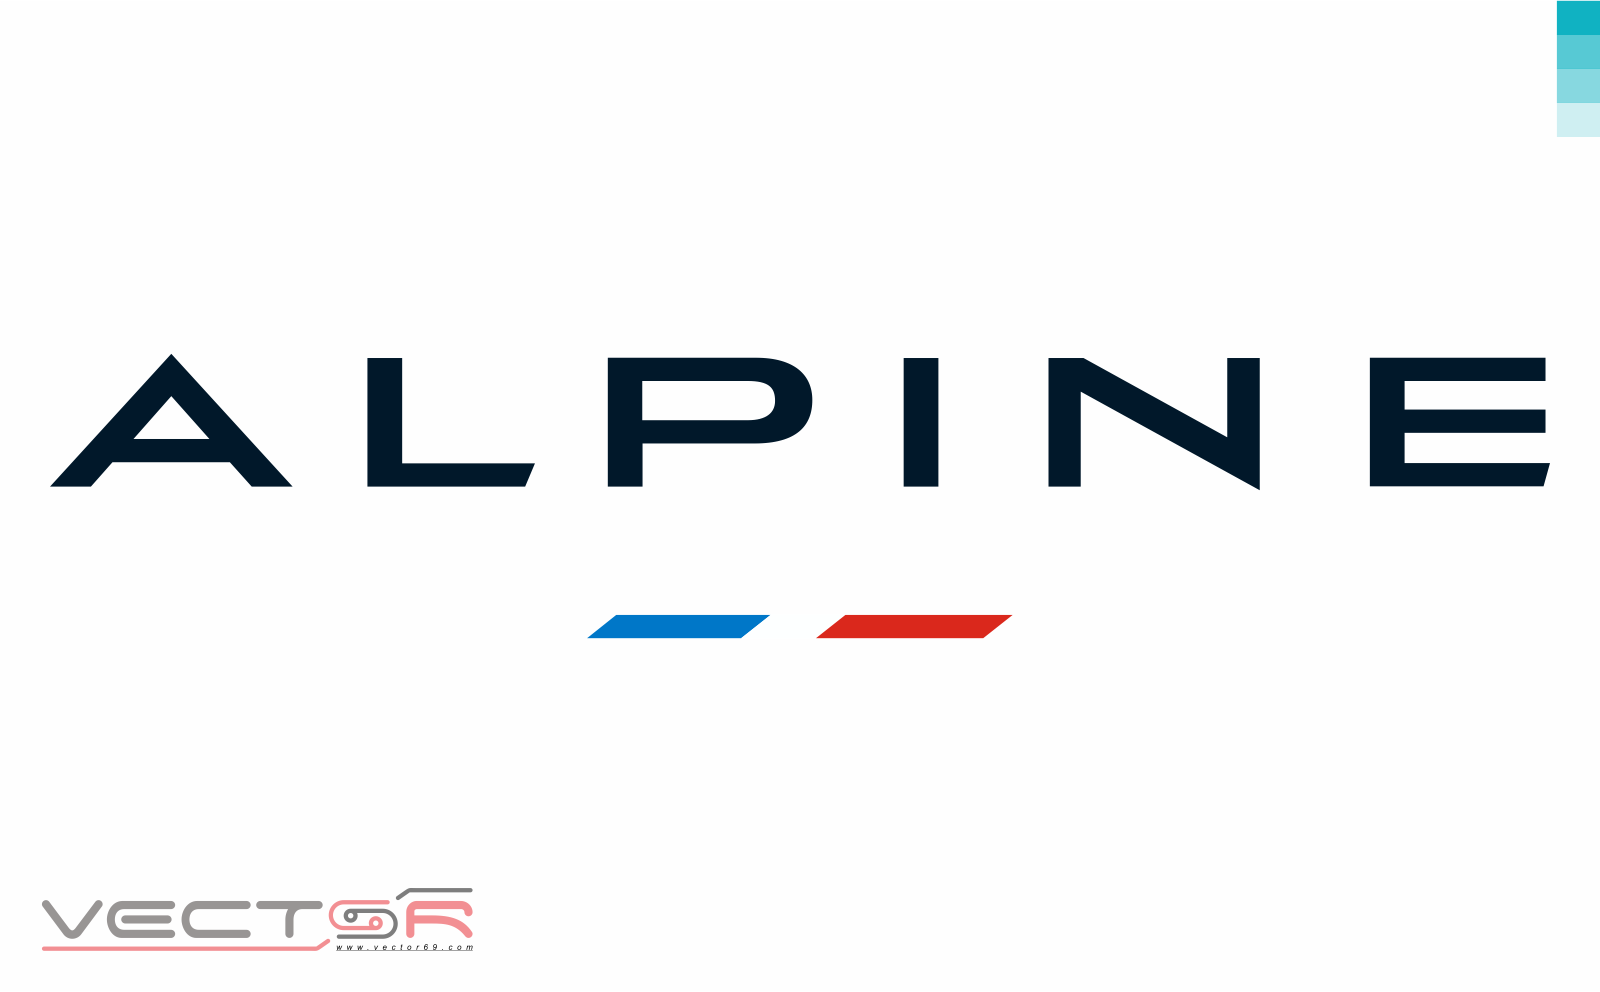 Alpine Cars Wordmark With Flag - Download Vector File SVG (Scalable Vector Graphics)